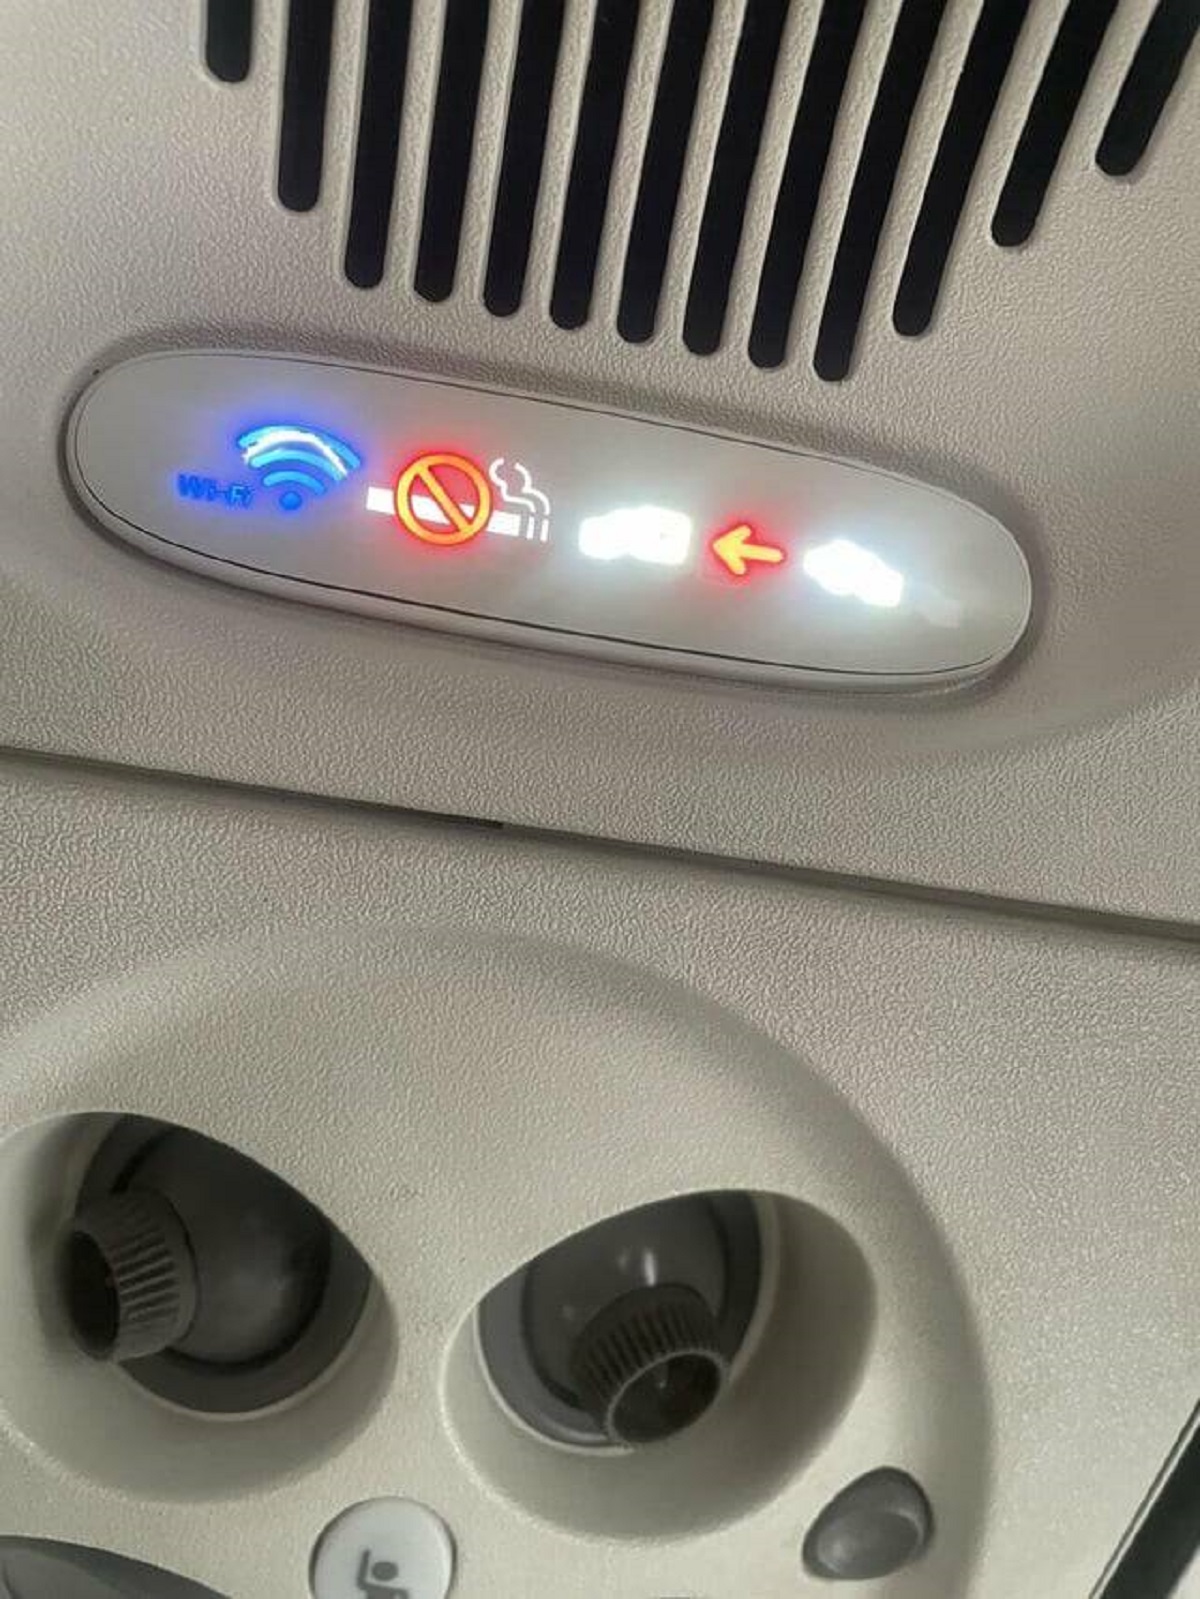 "WiFi indicator on a plane, broken by people pressing it for “free WiFi”"